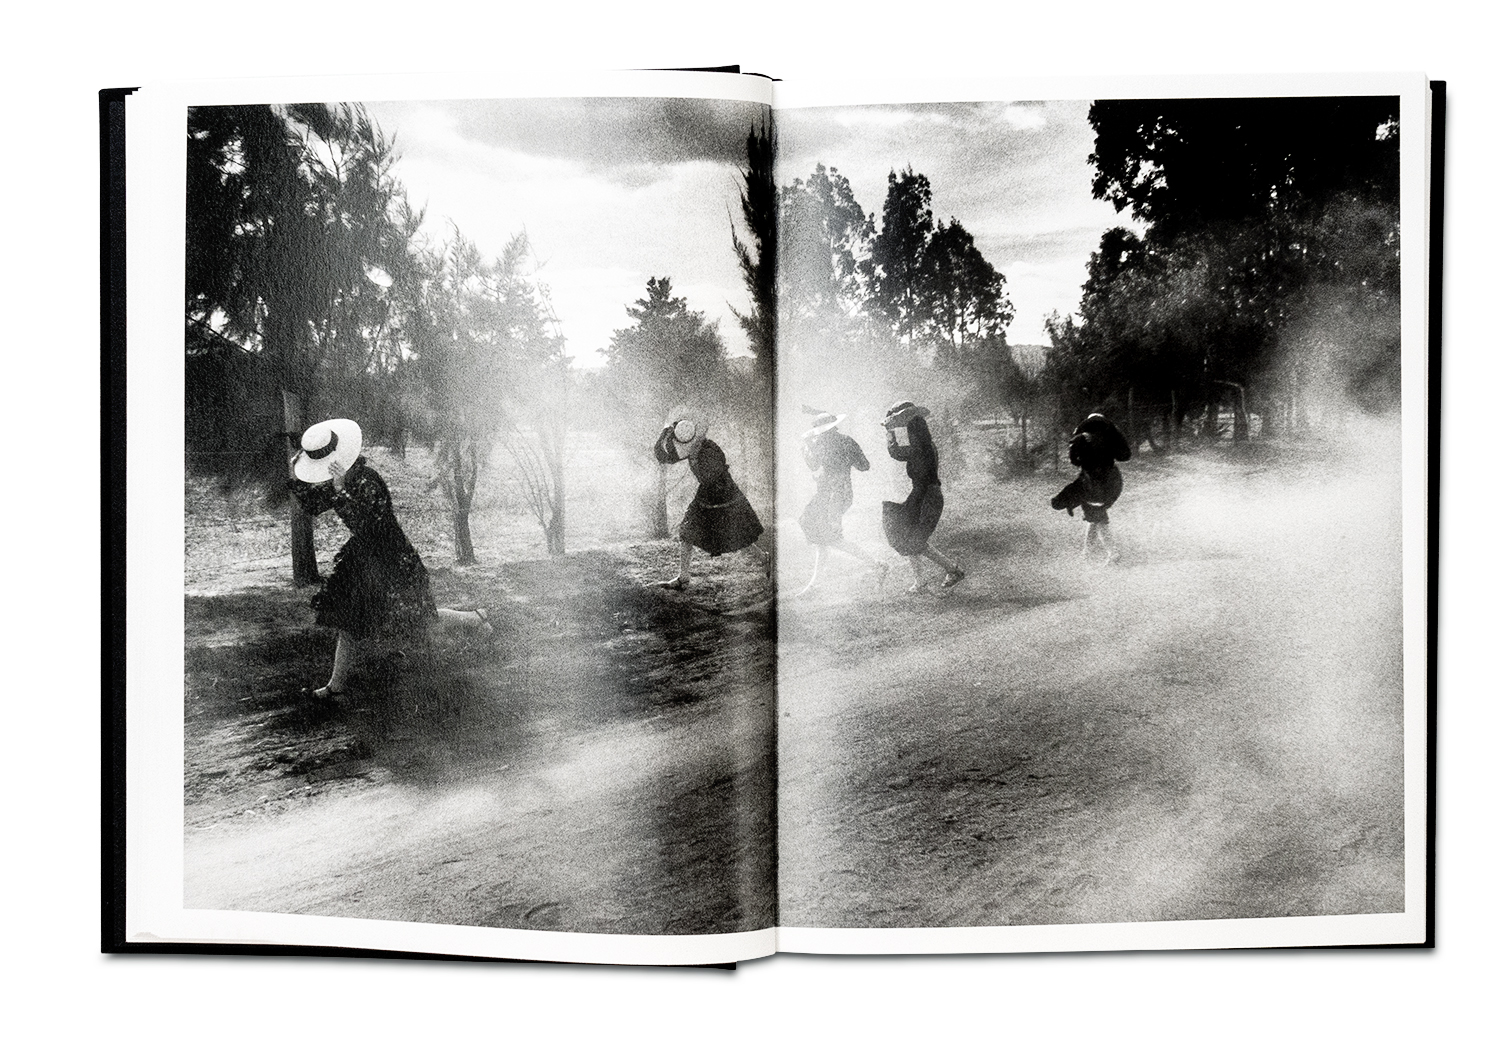 © Larry Towell / GOST